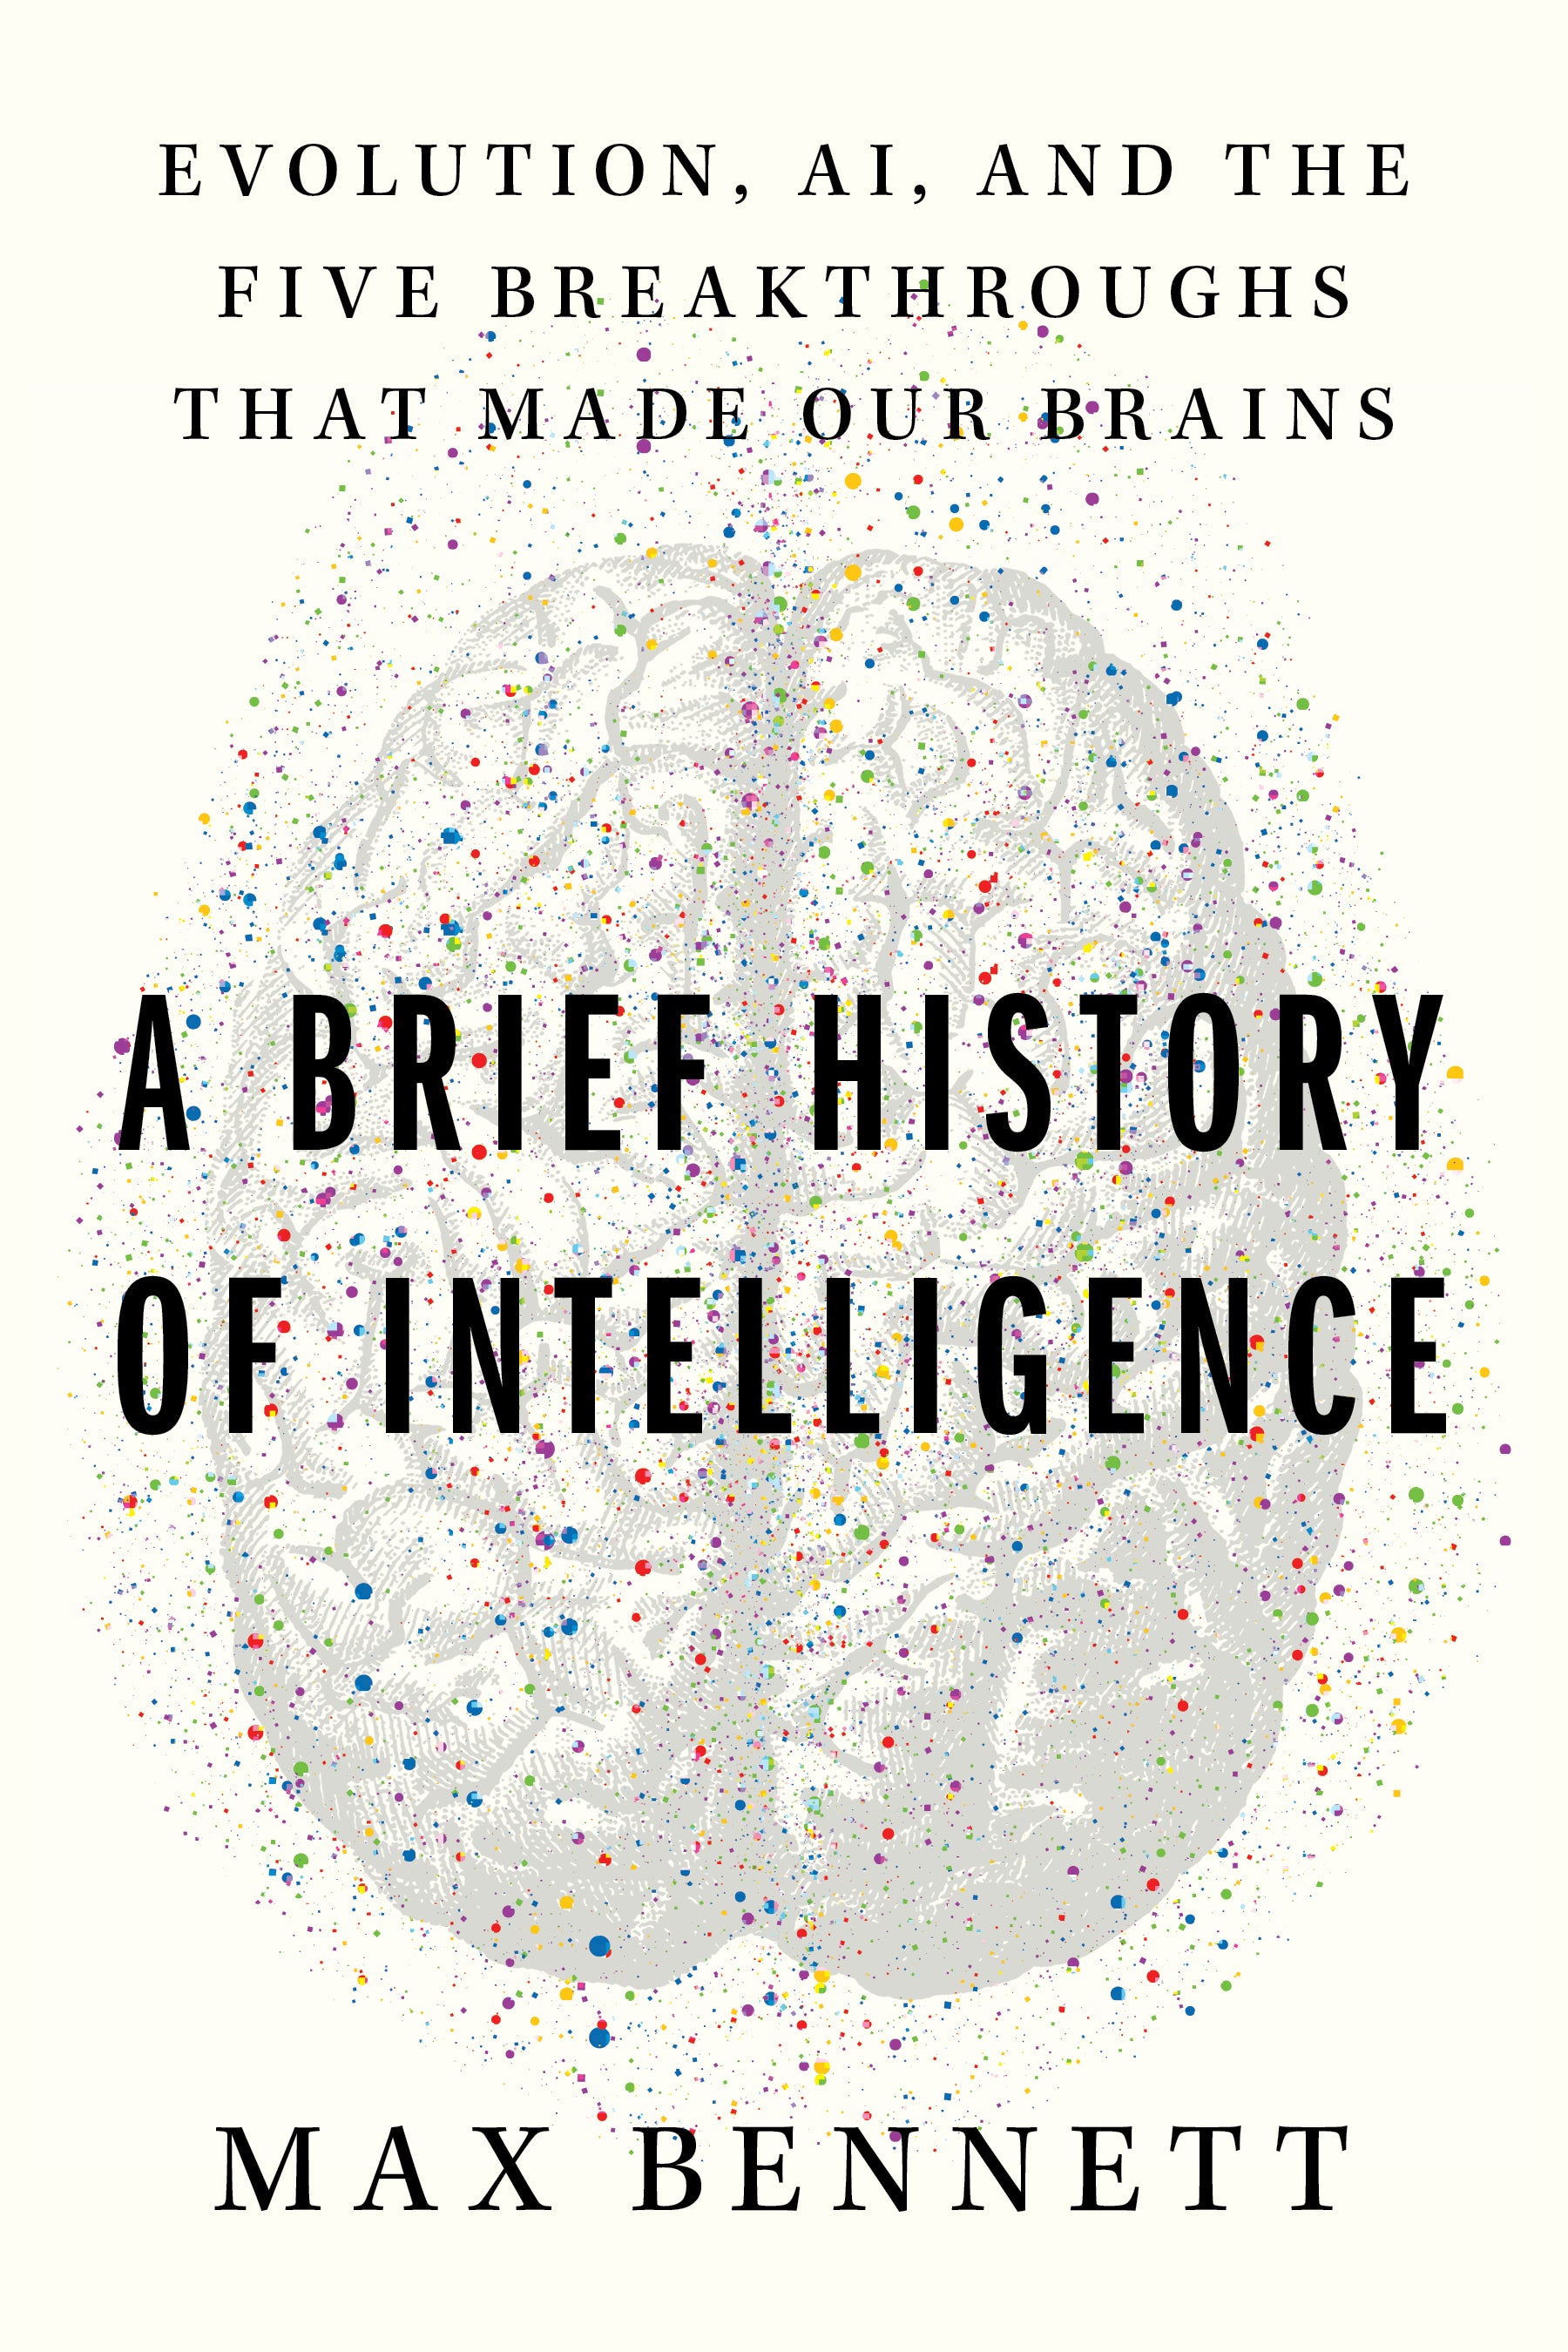 Book Review - A Brief History of Intelligence